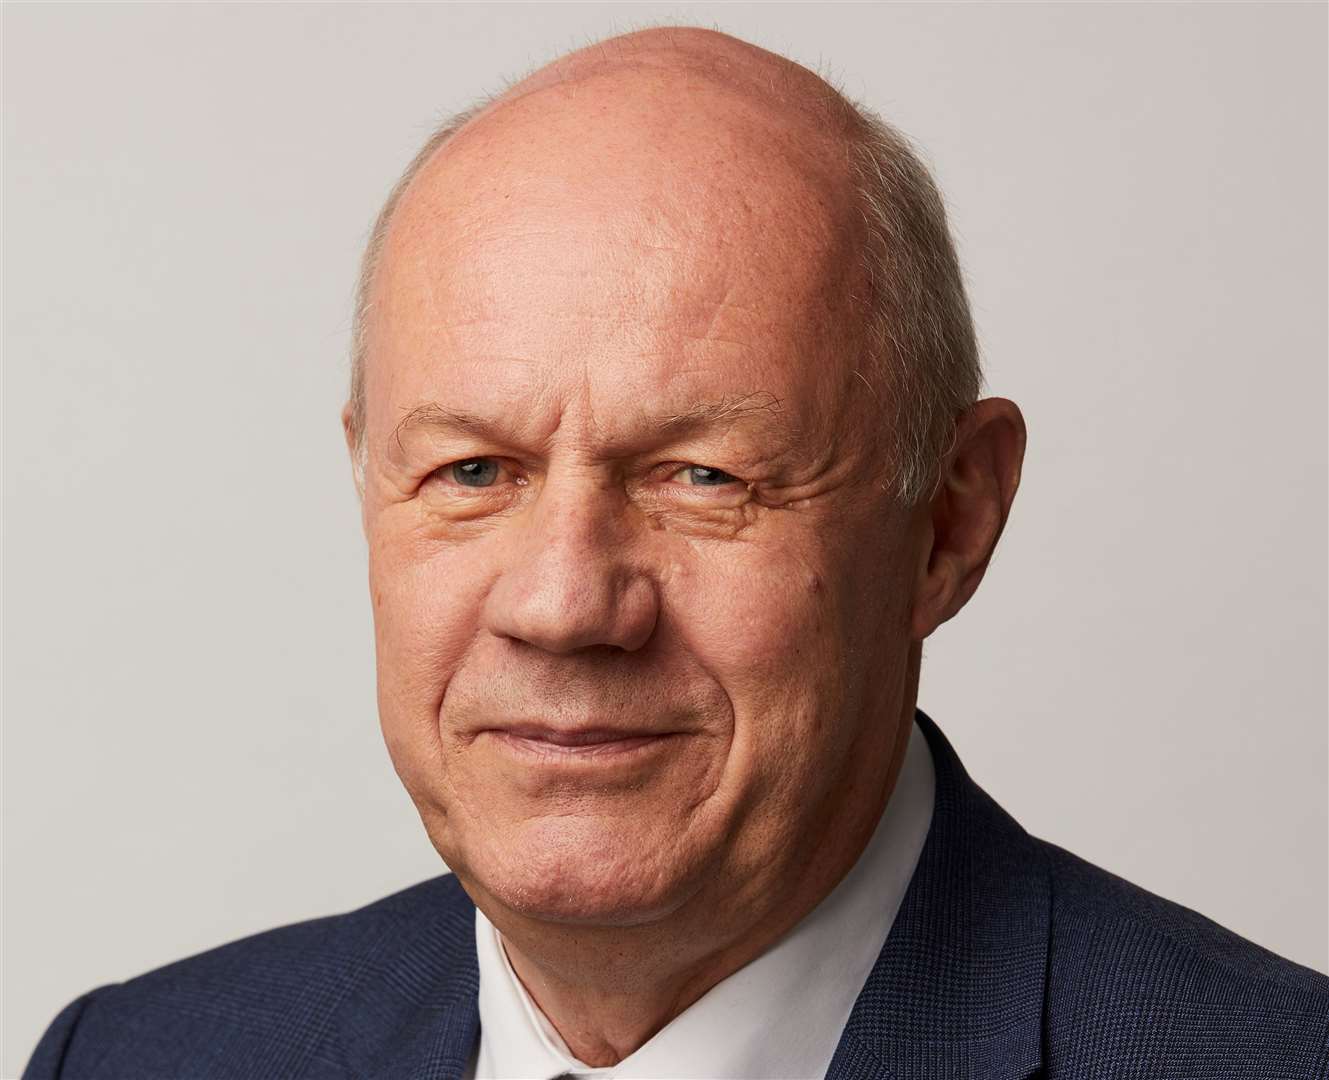 Ashford MP Damian Green voted against the PM